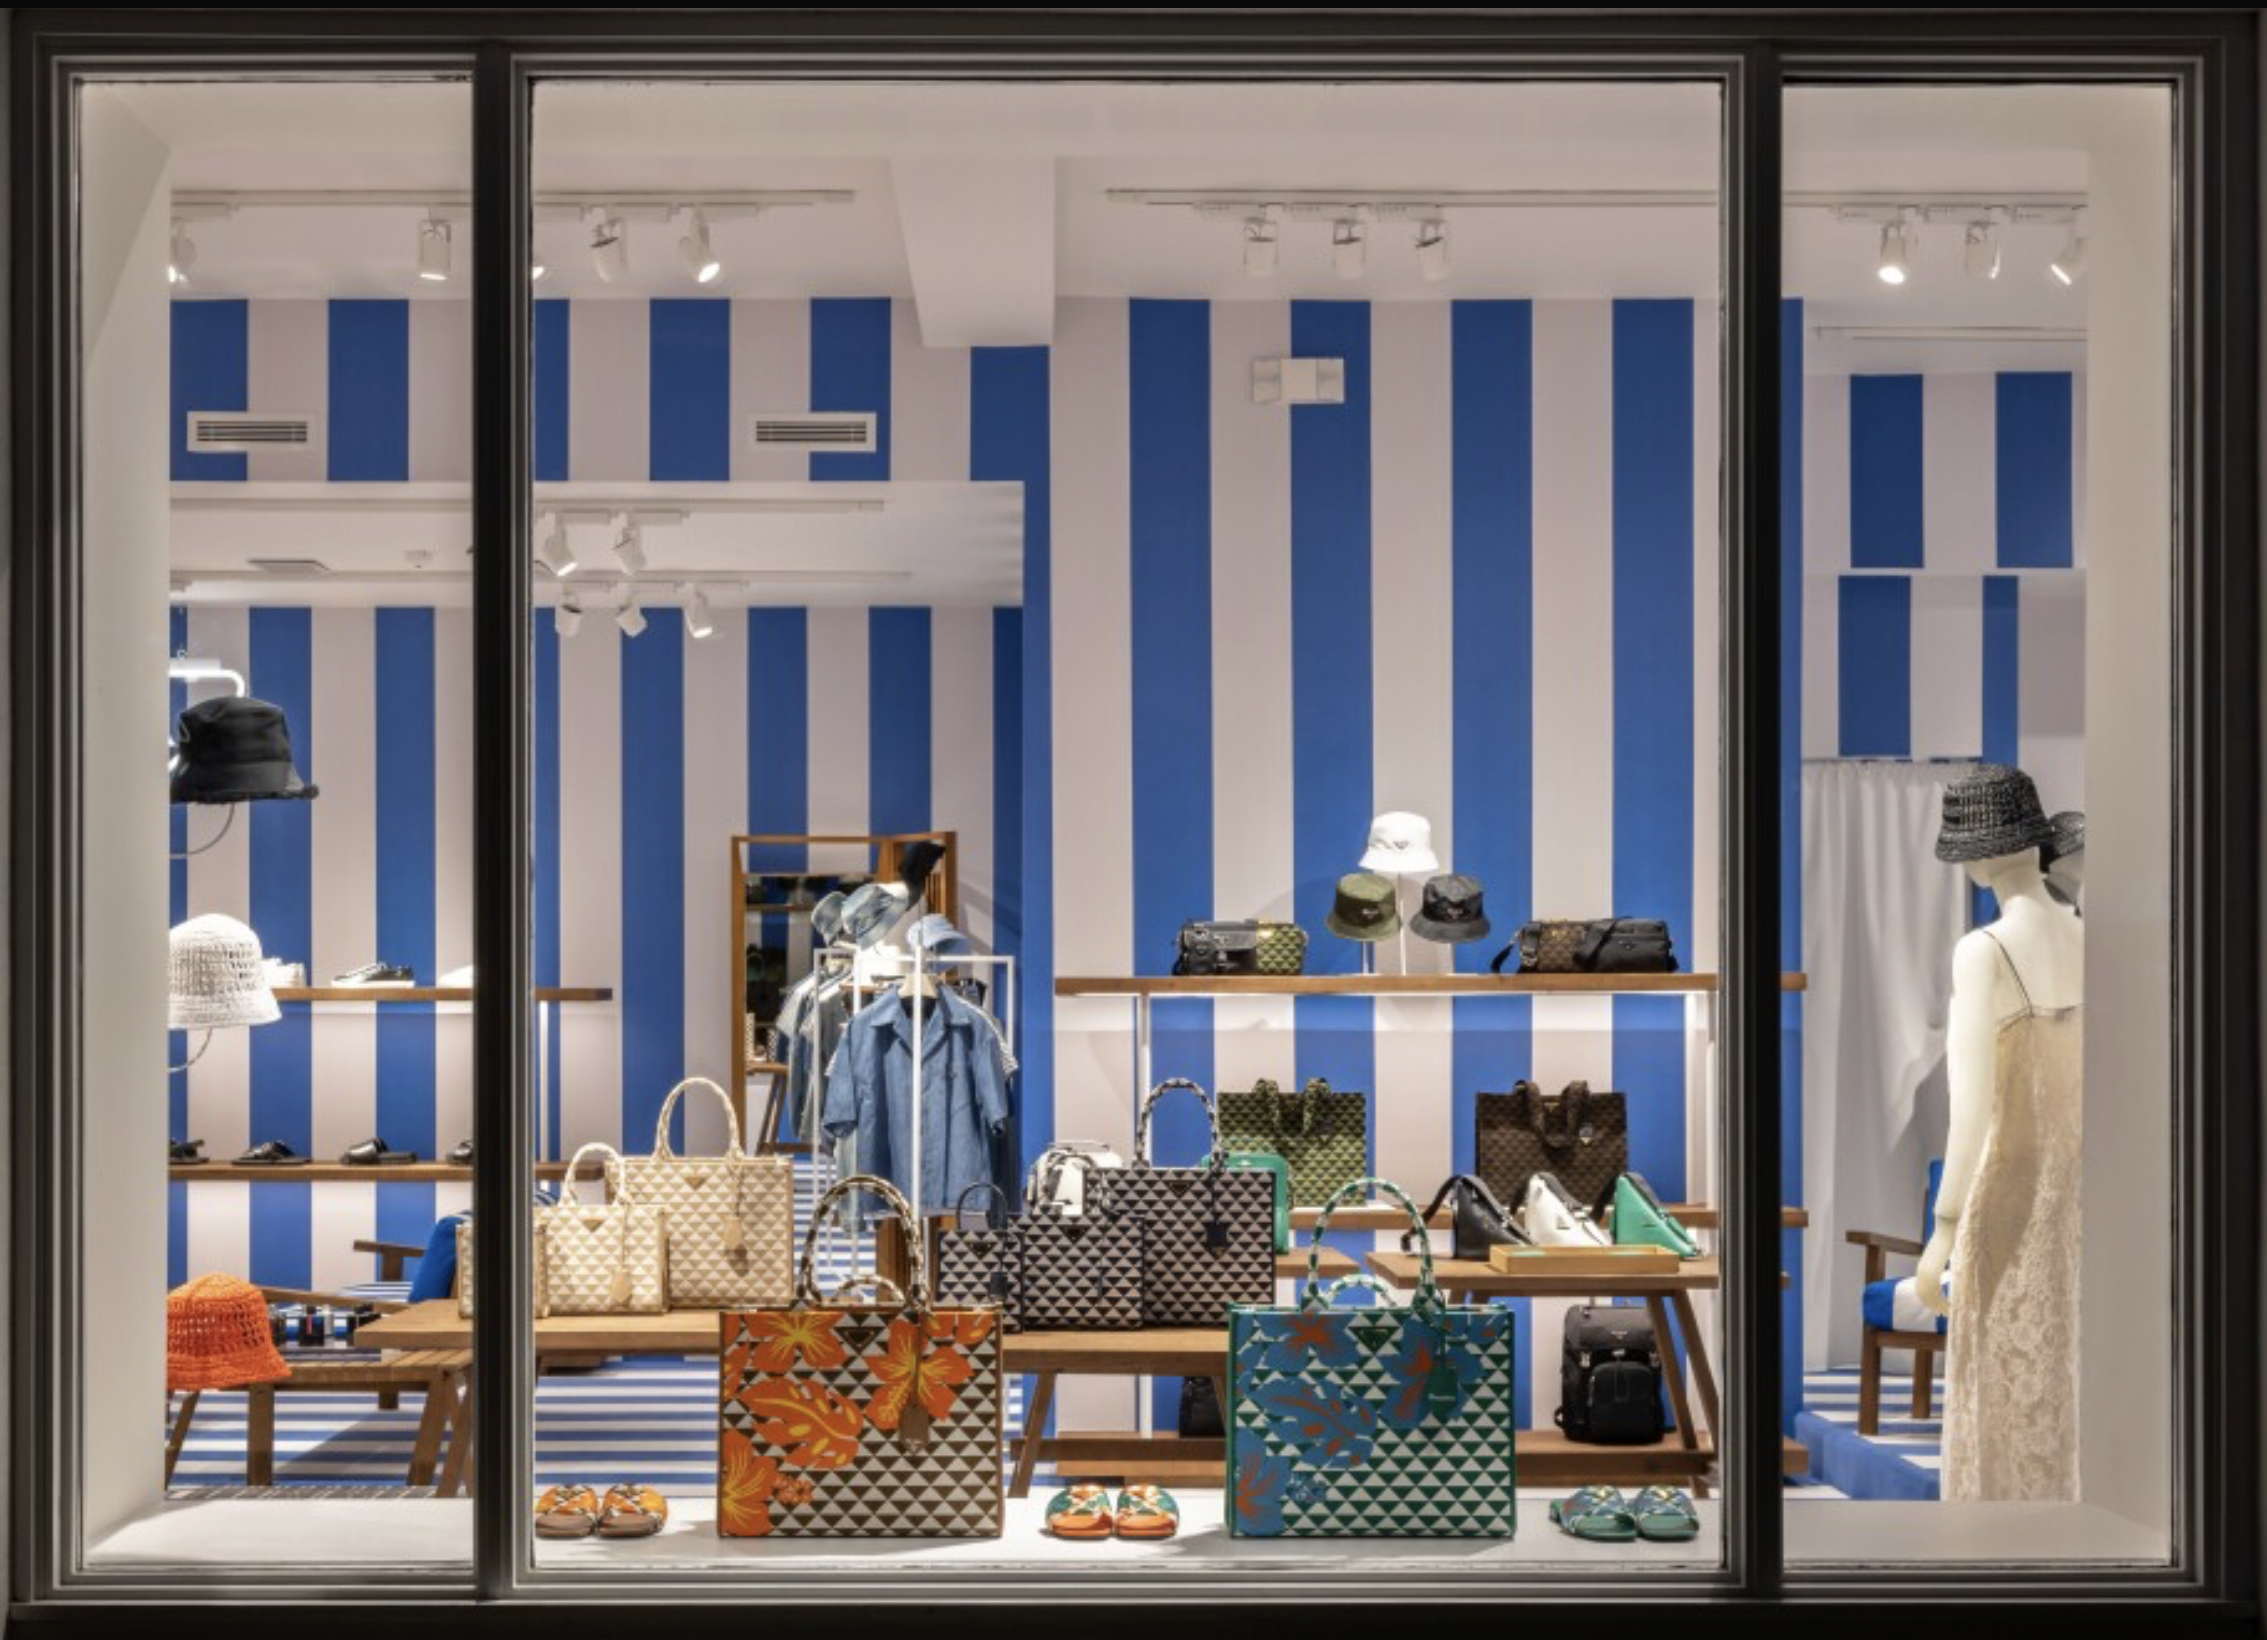 Louis Vuitton opens new store in East Hampton